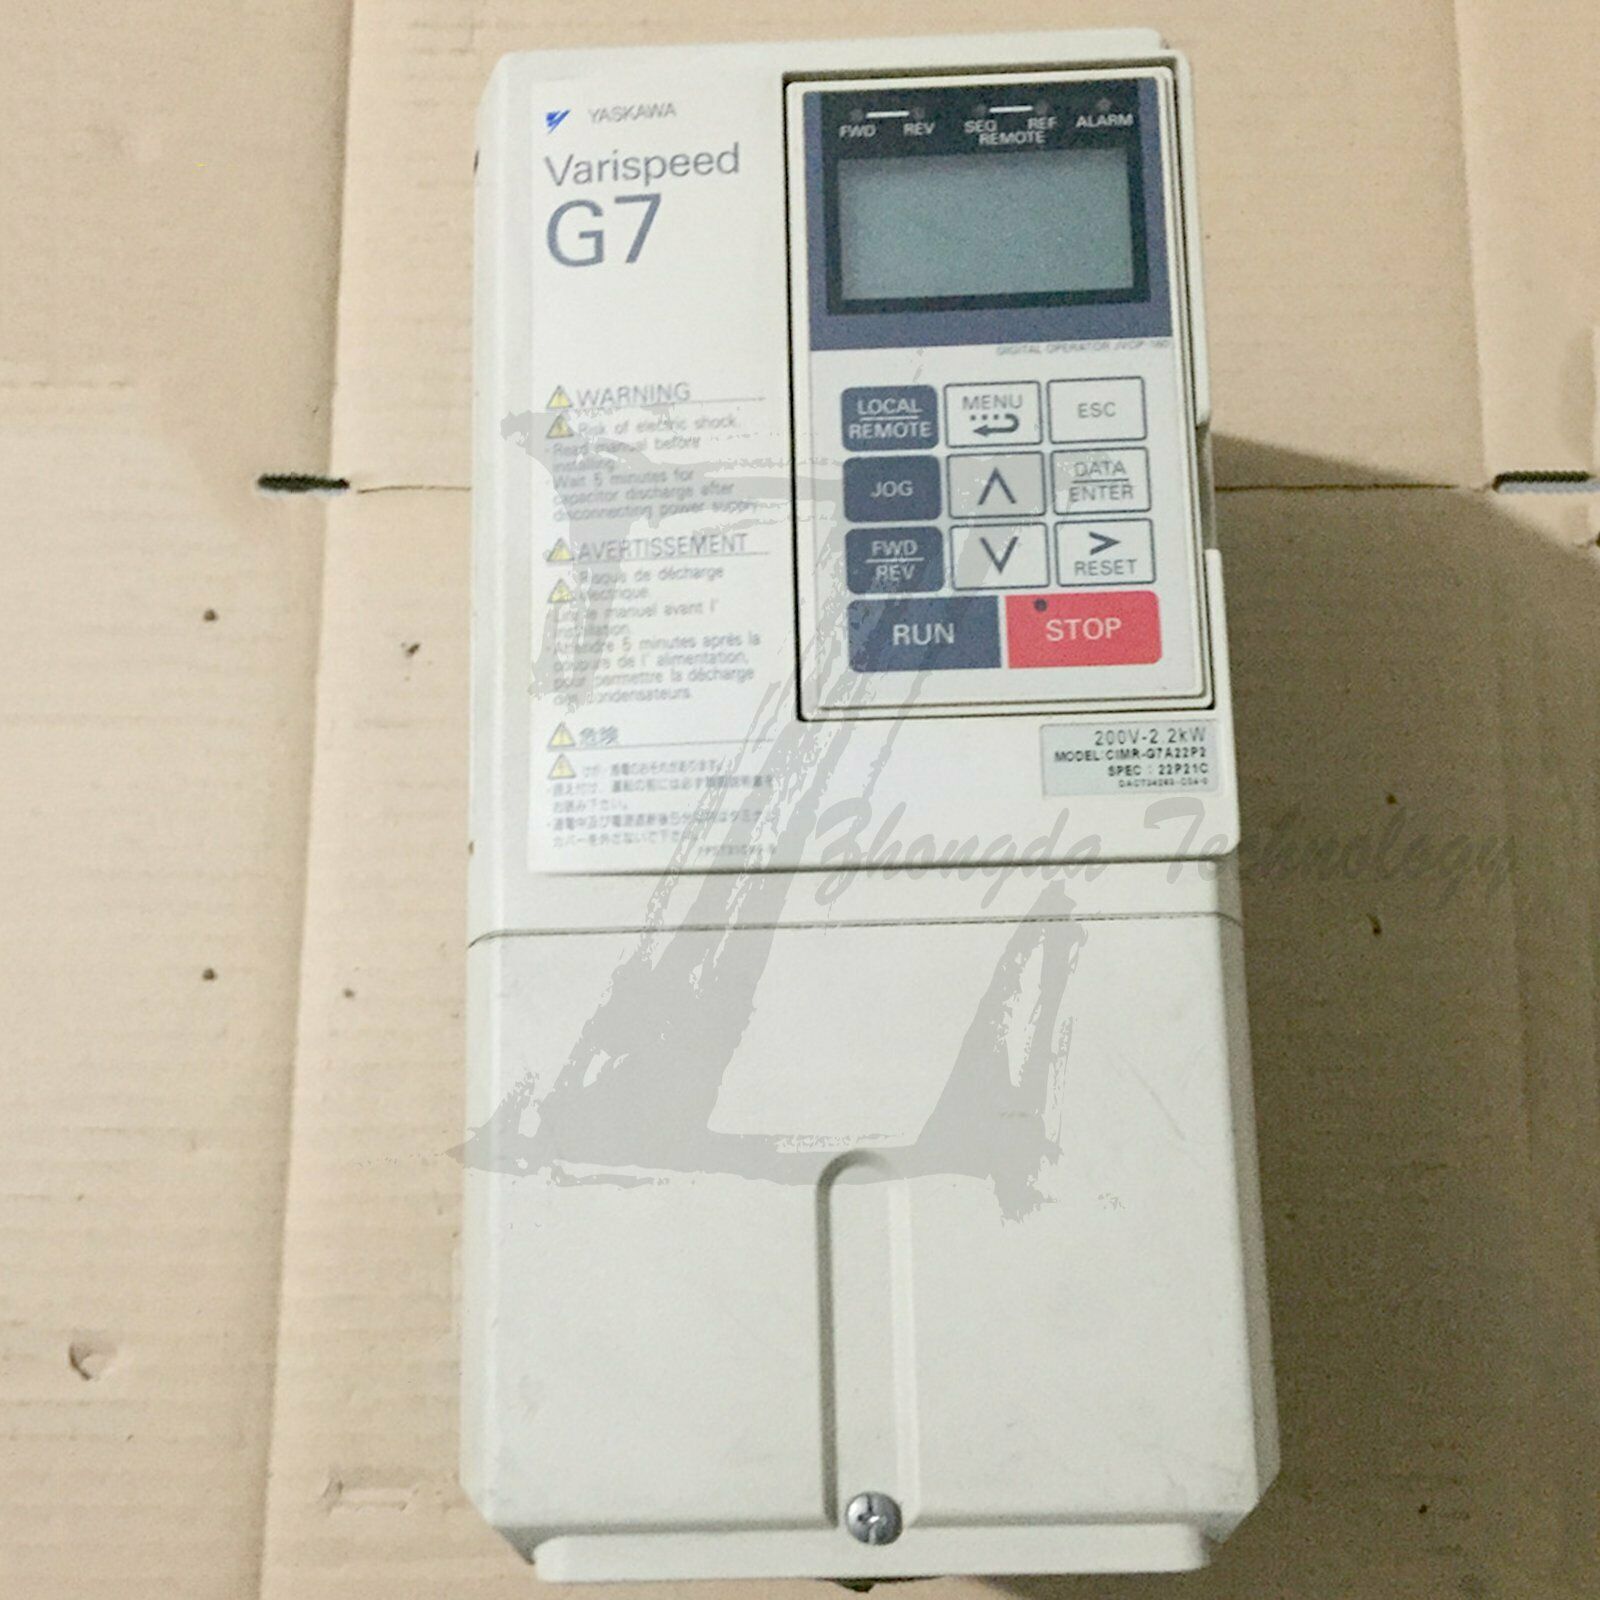 1PC Used Yasukawa frequency converter CIMR-G7A22P2 Tested In Good Condition KOEED 500+, 70%, import_2020_10_10_031751, Other, Yaskawa